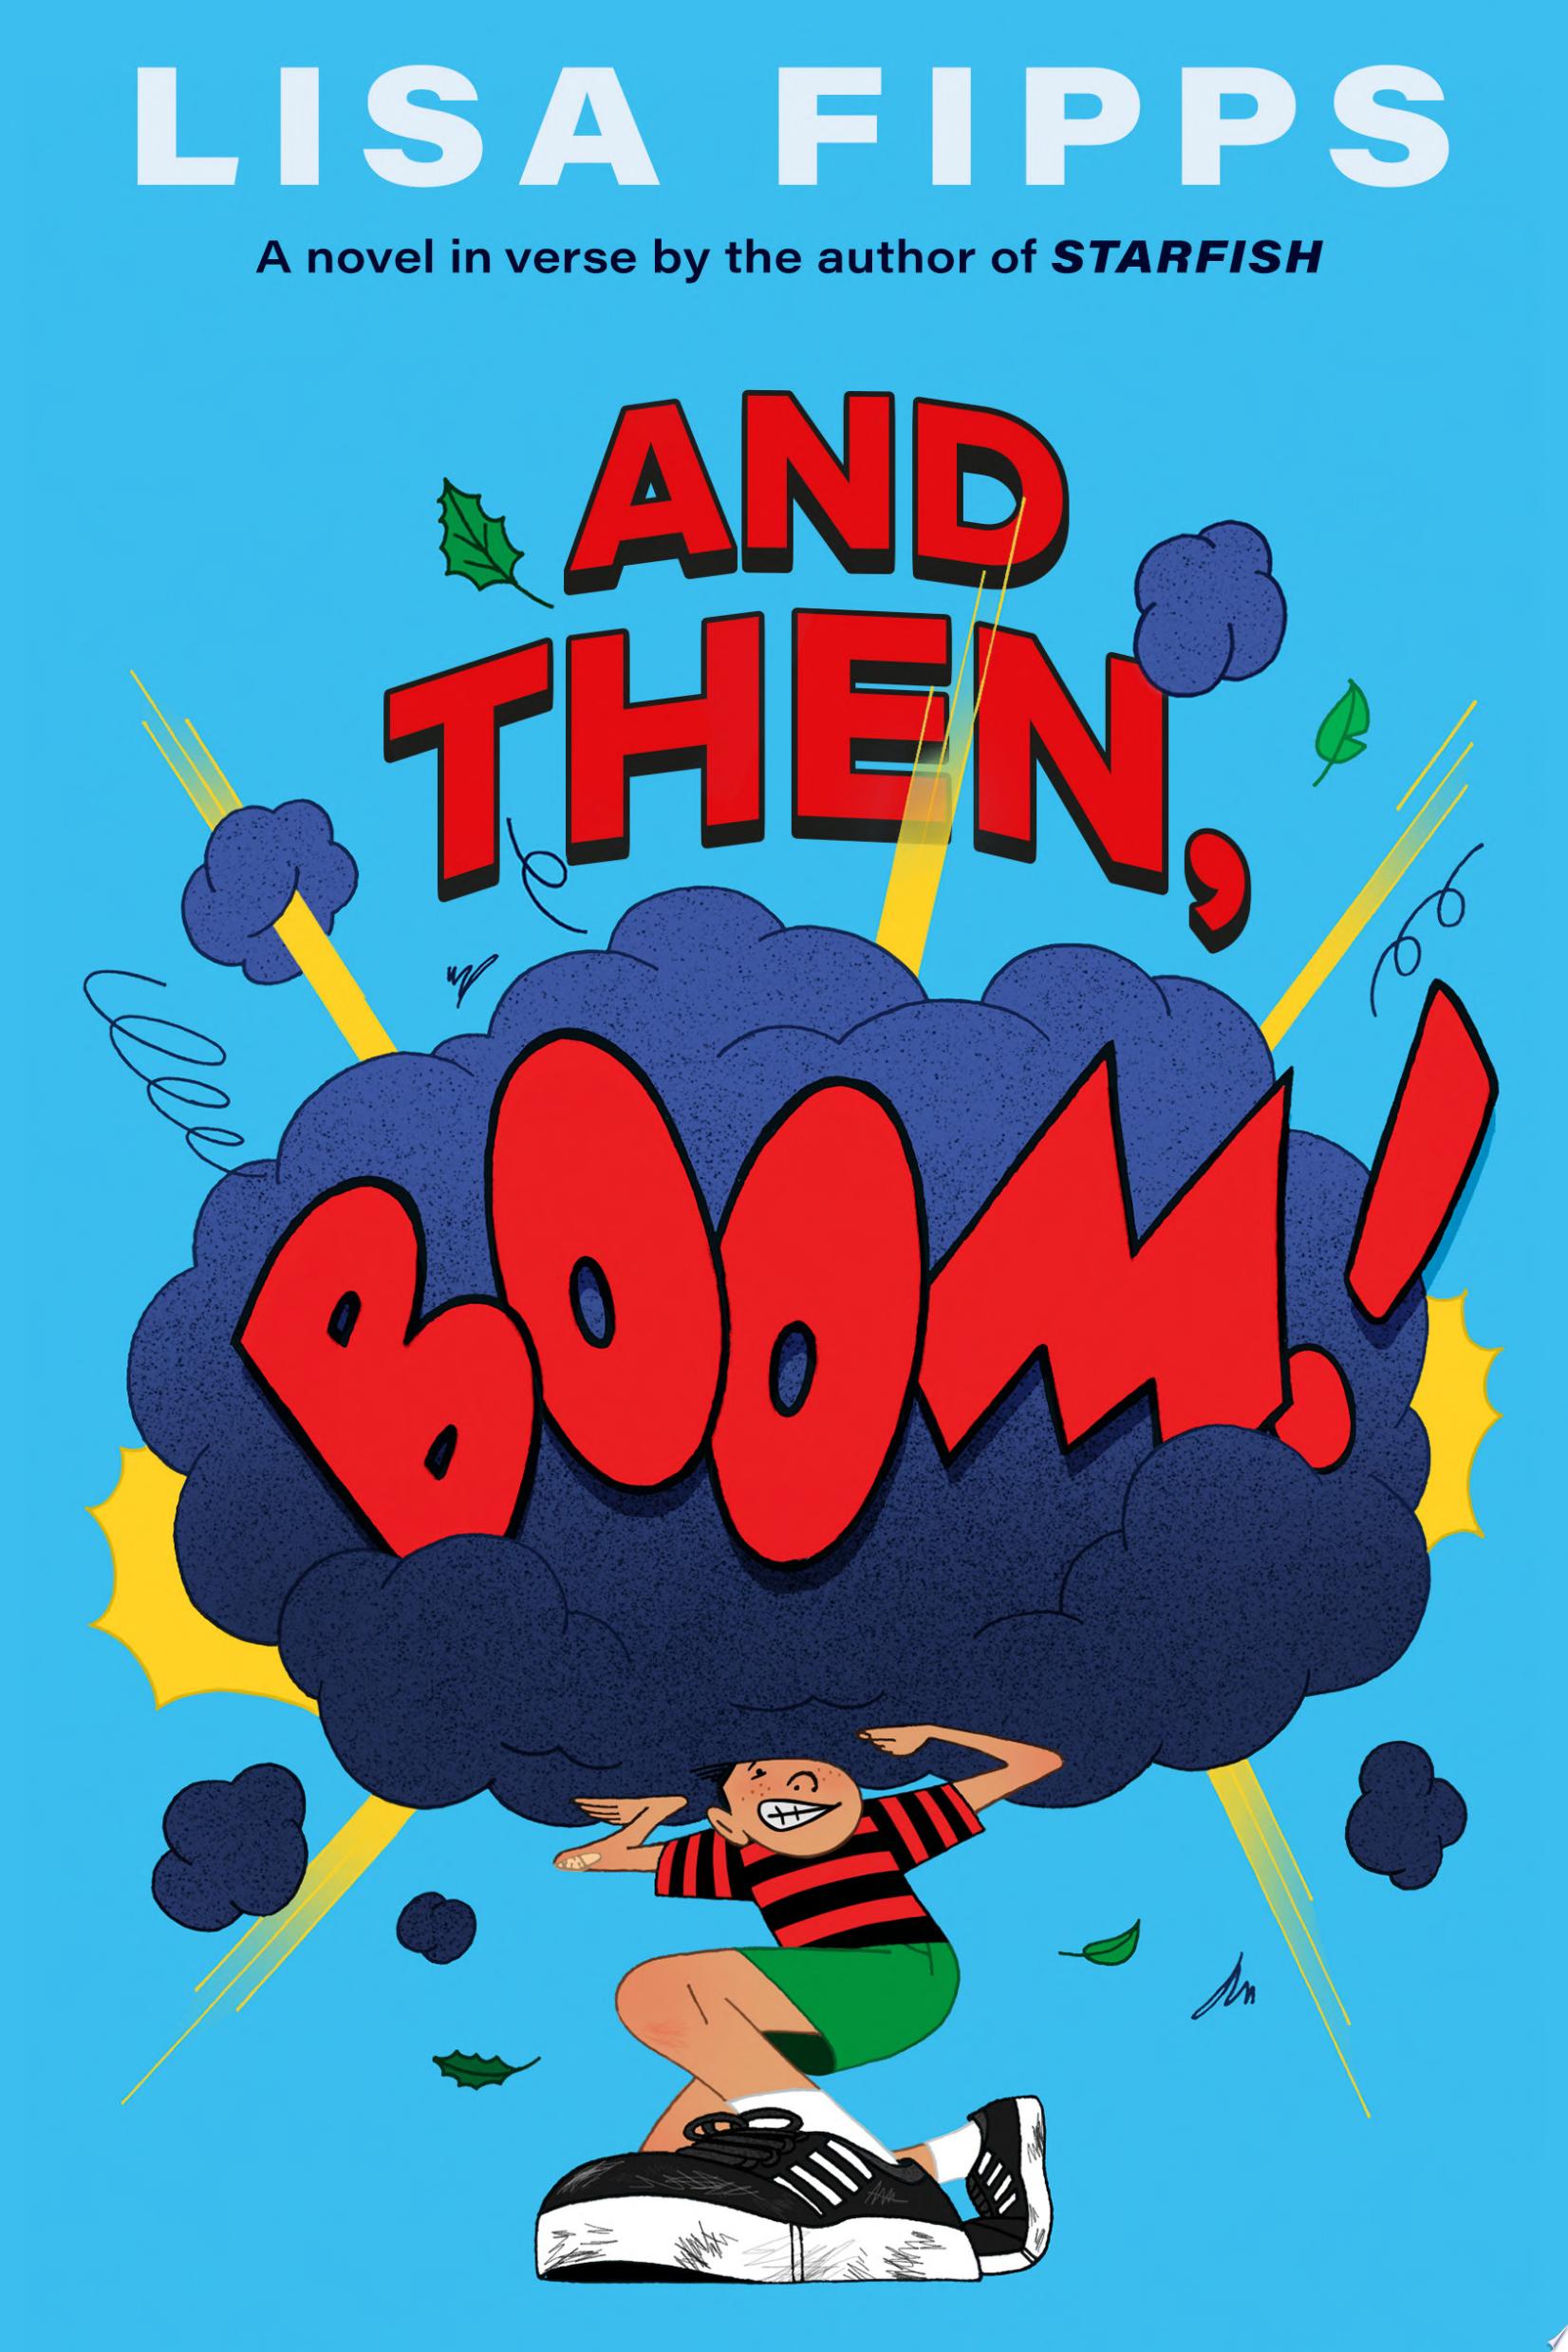 Image for "And Then, Boom!"